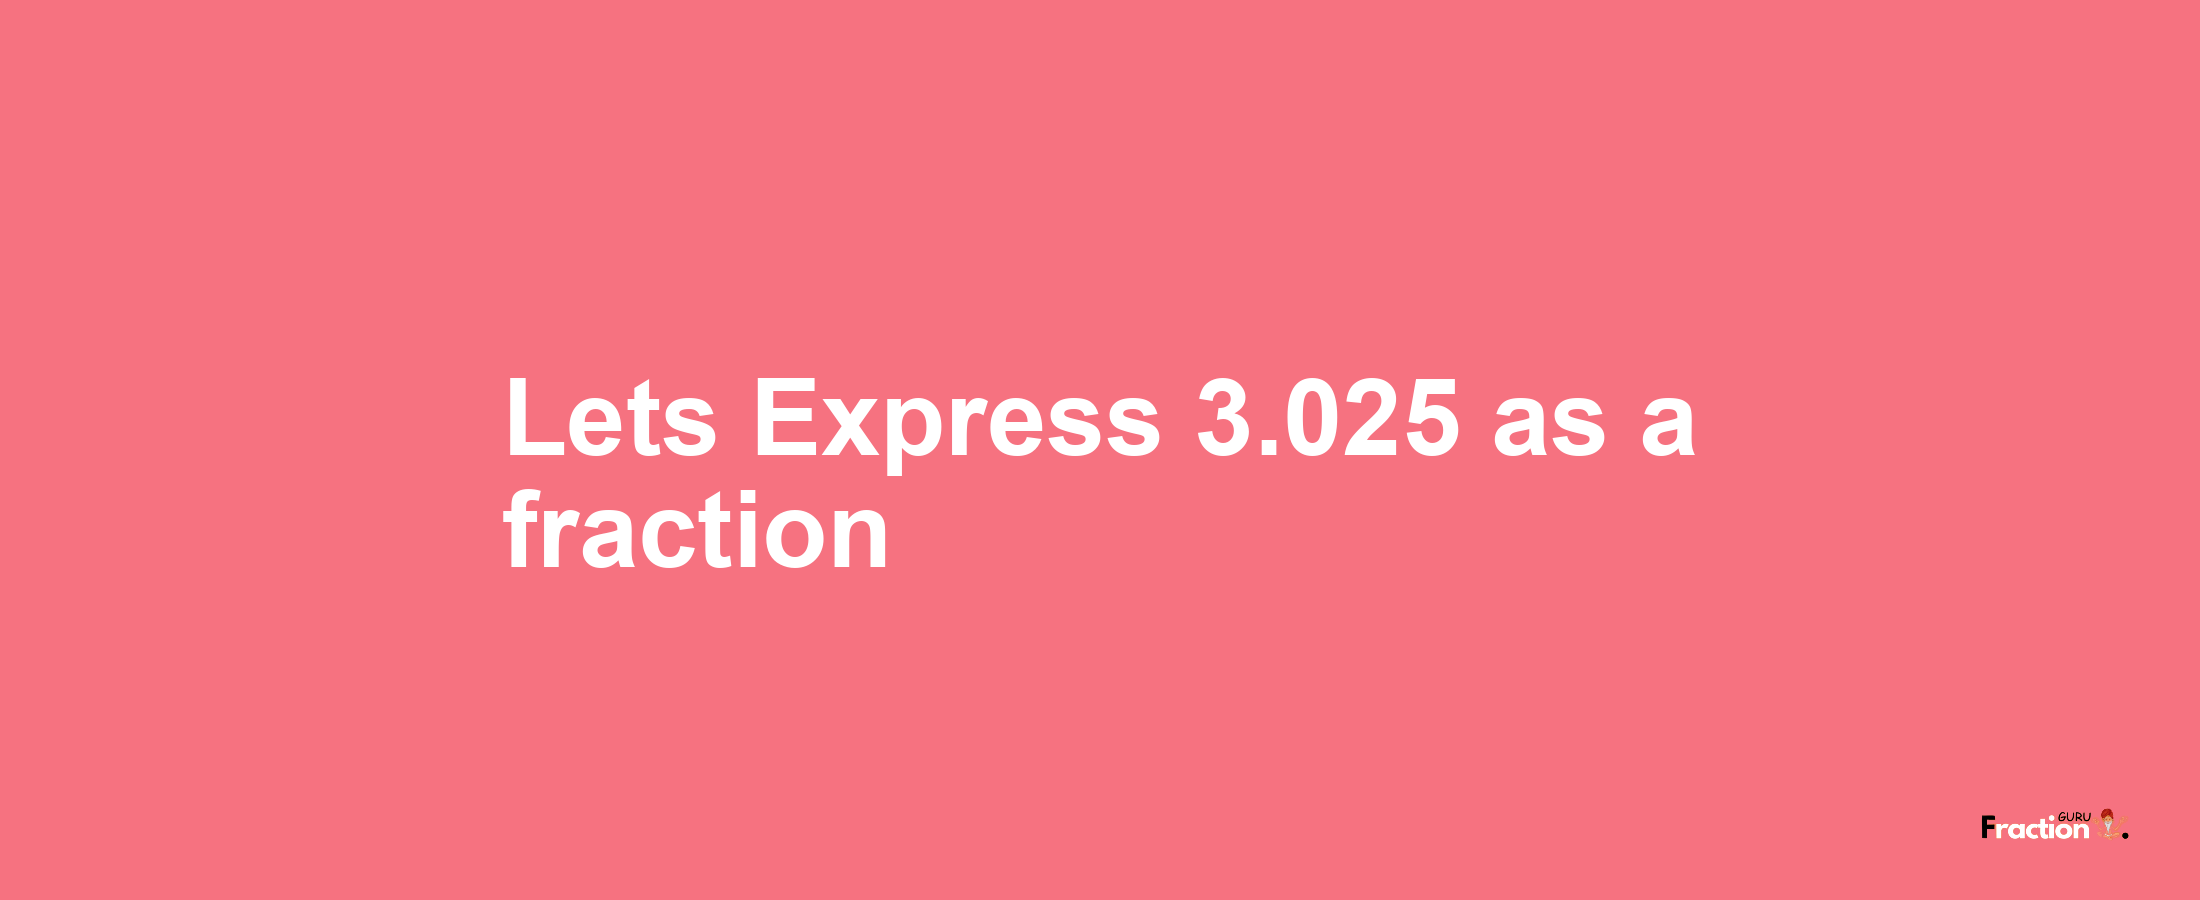 Lets Express 3.025 as afraction